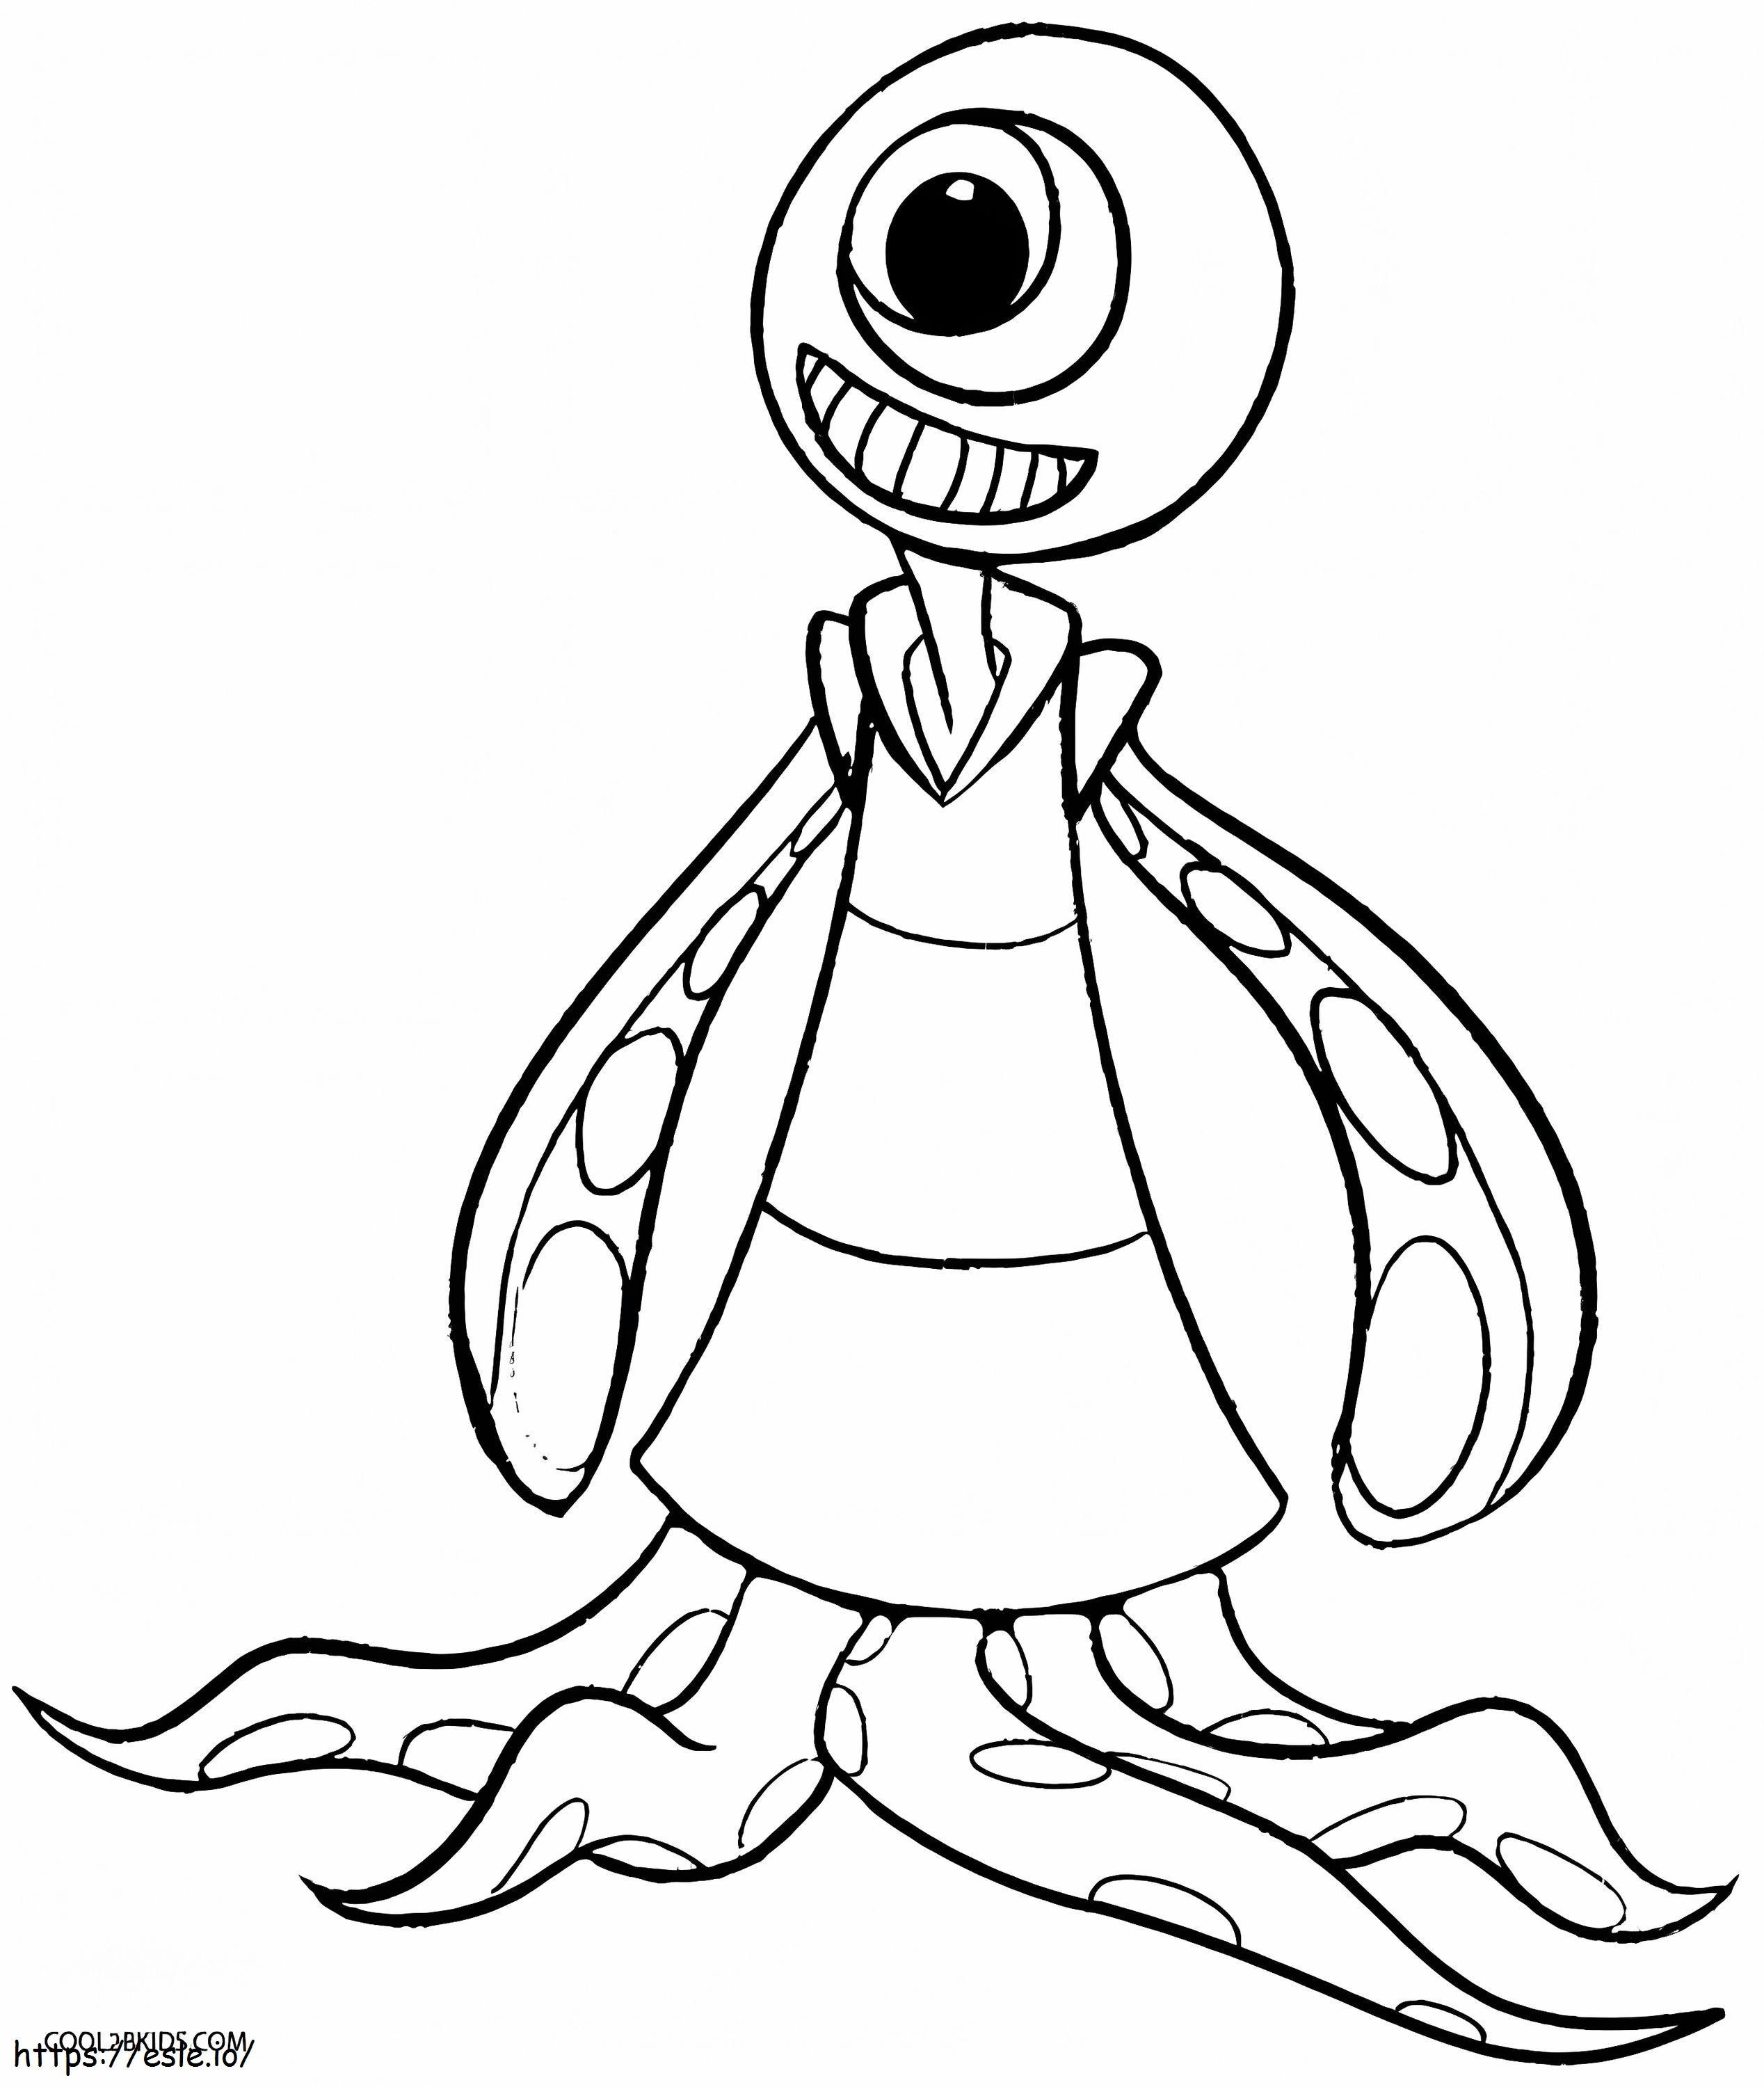 Funny Aliens coloring page